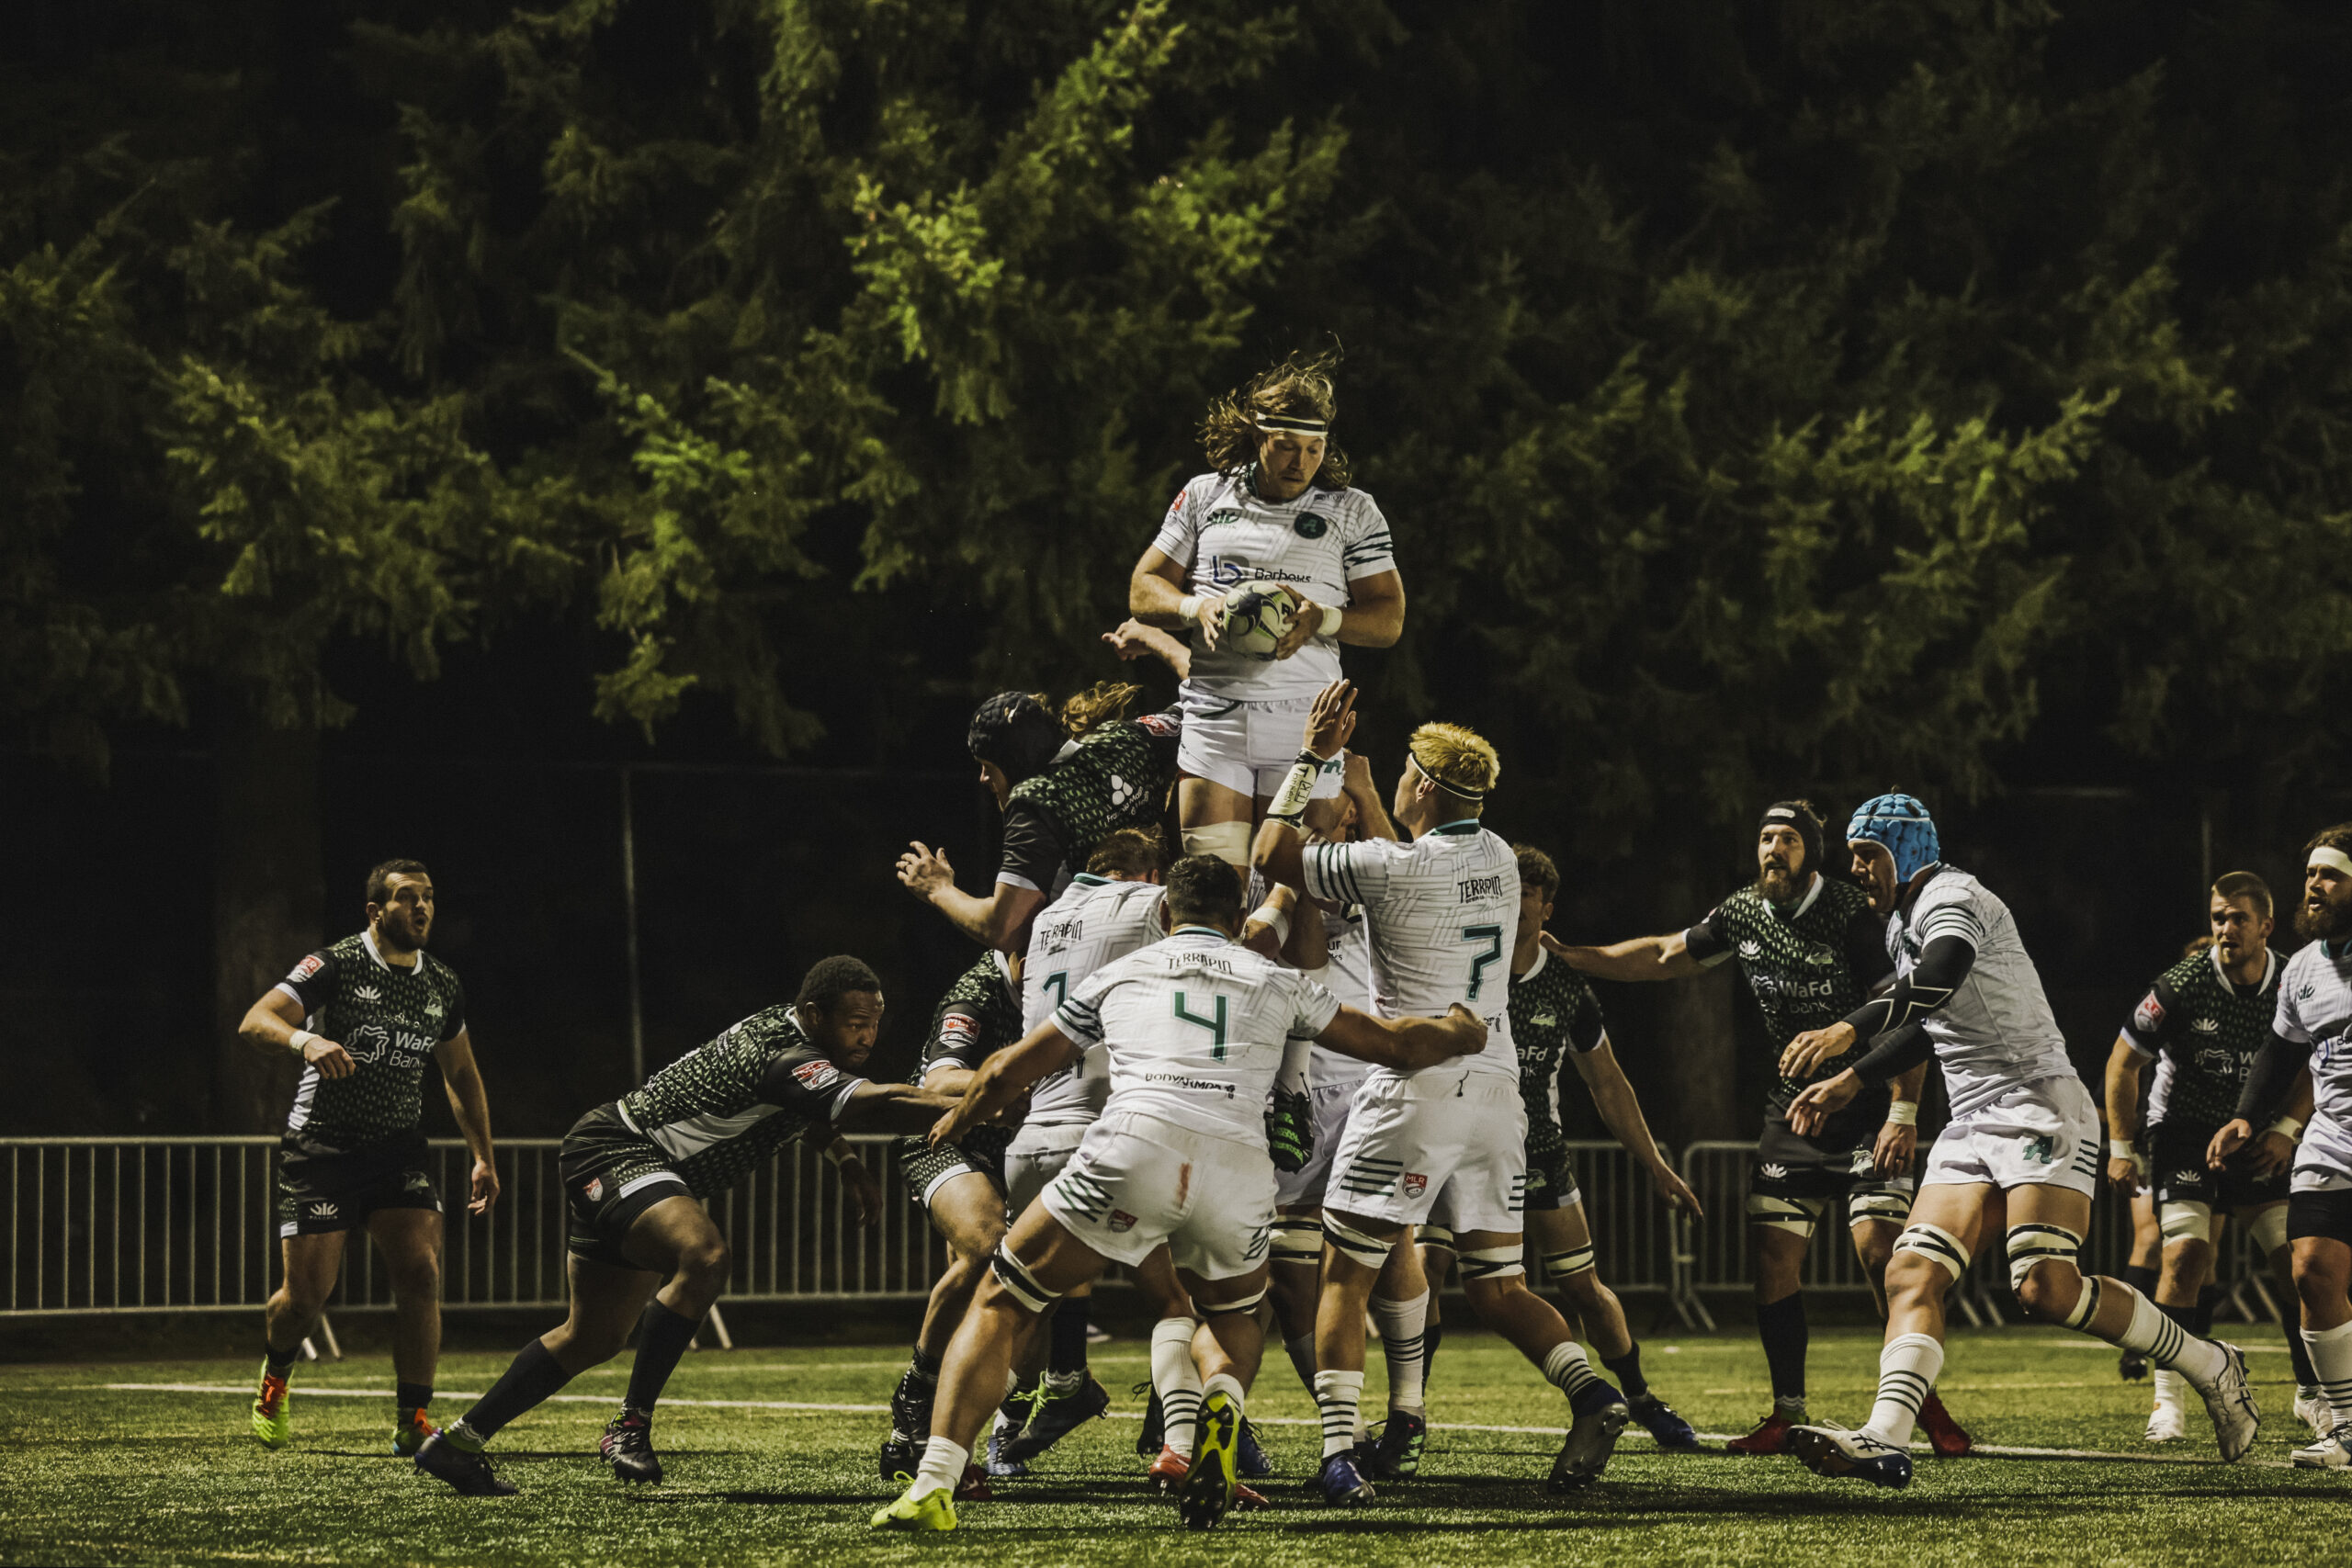 Rugby ATL falls to Seattle Seawolves